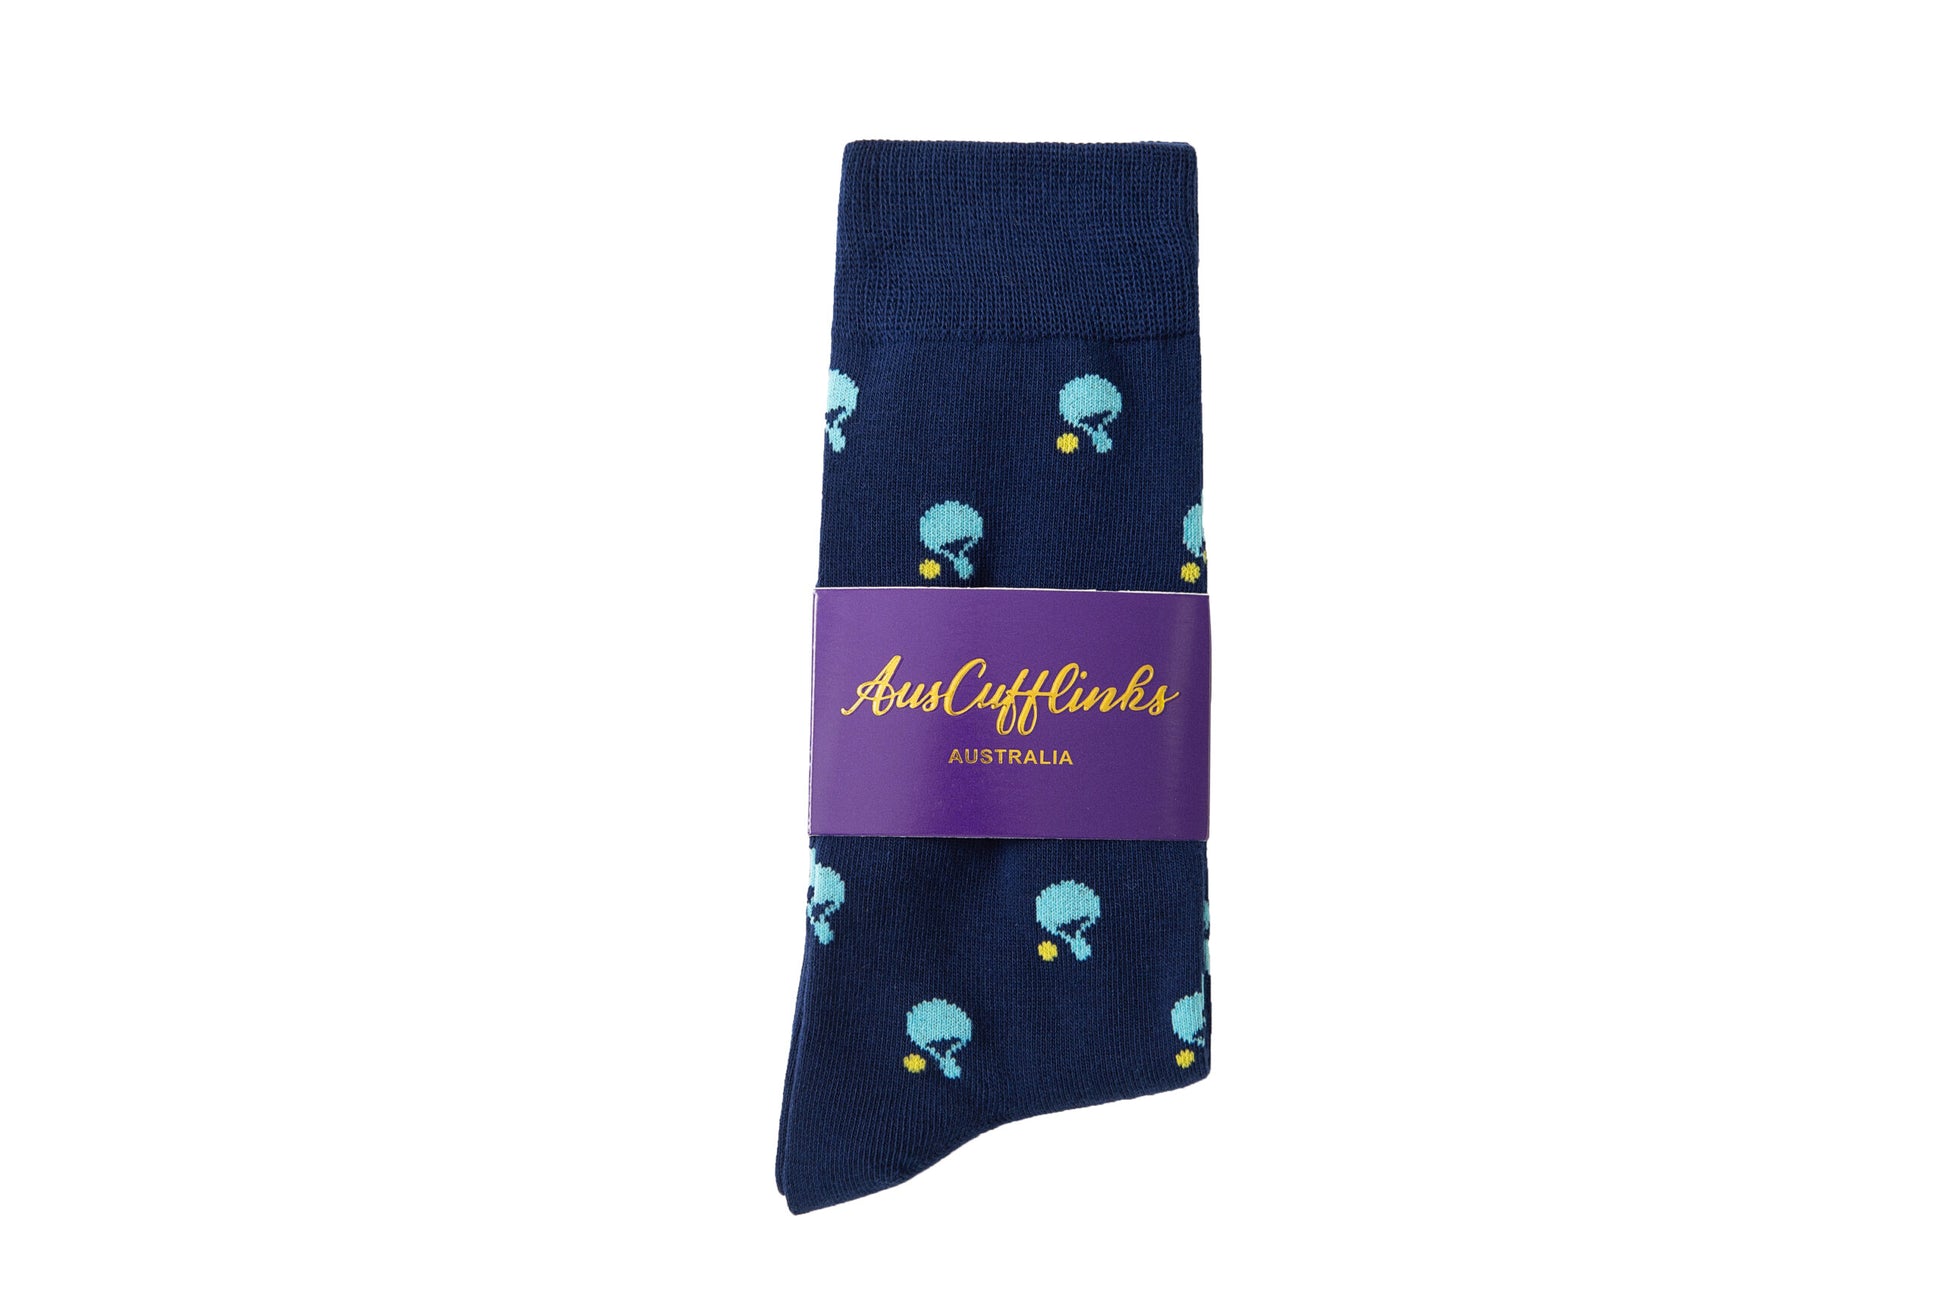 A single blue Table Tennis Sock featuring light blue trees and yellow dots, wrapped in a purple label reading "AusCufflinks Australia," embodies perfection for your feet.